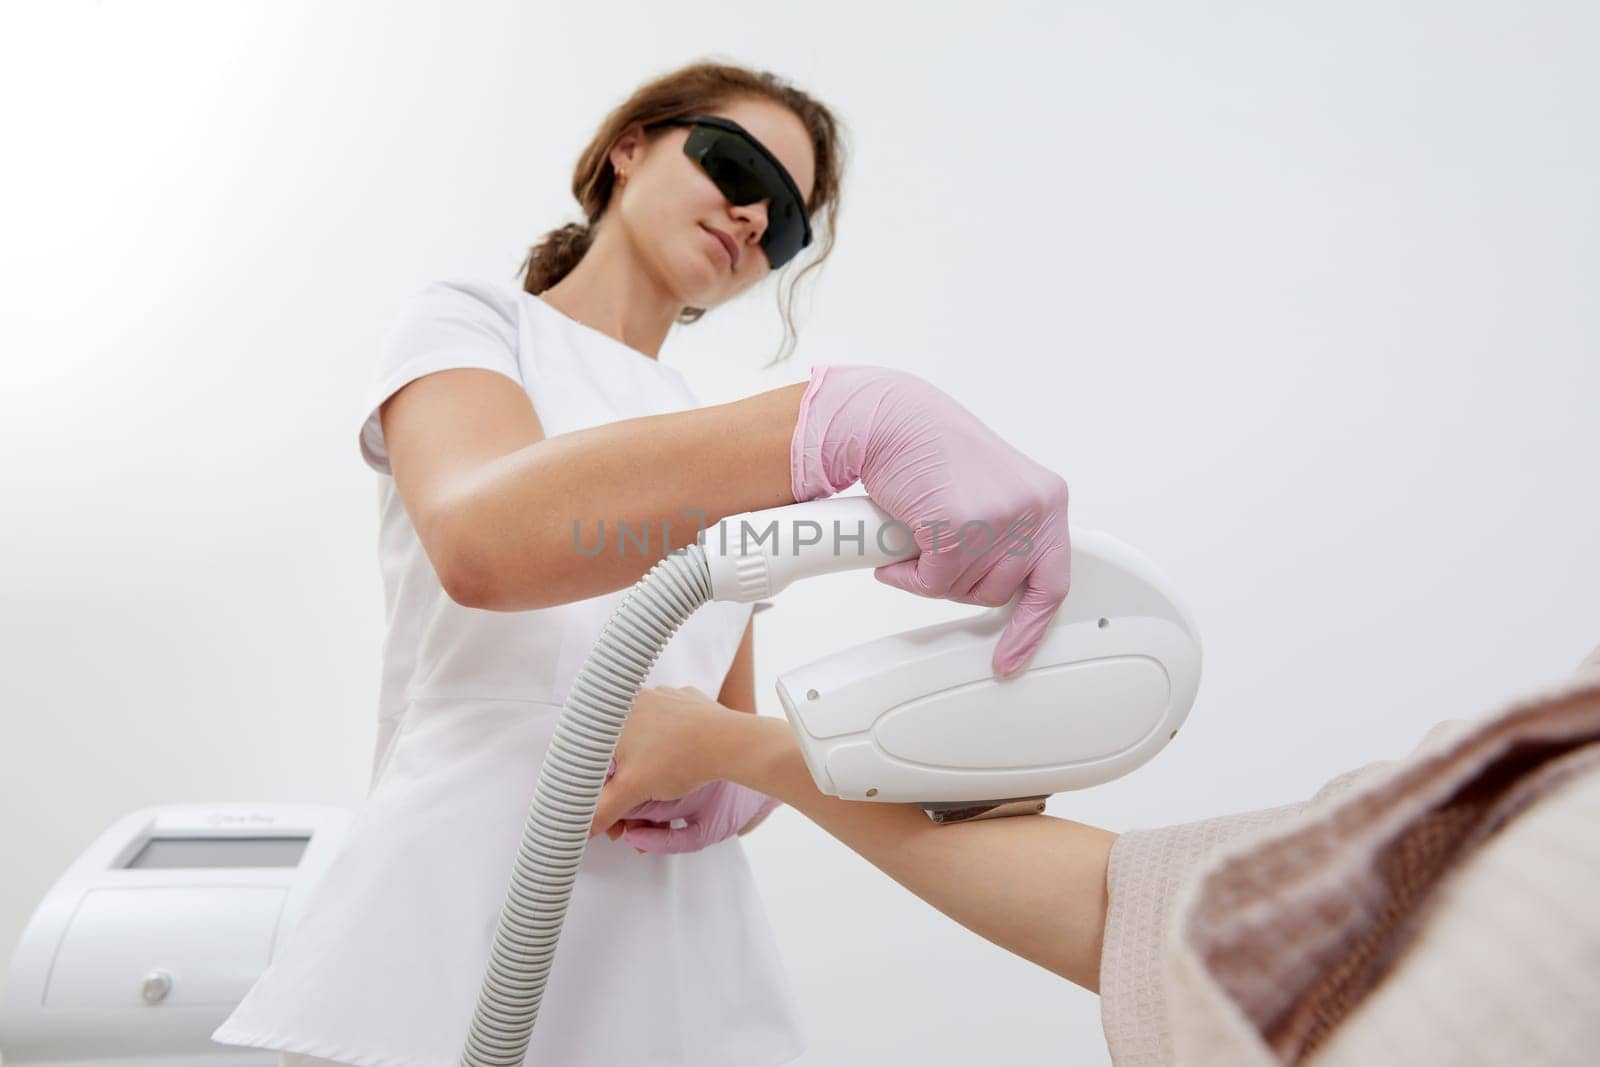 A woman in a salon setting gets her hands treated with laser hair removal